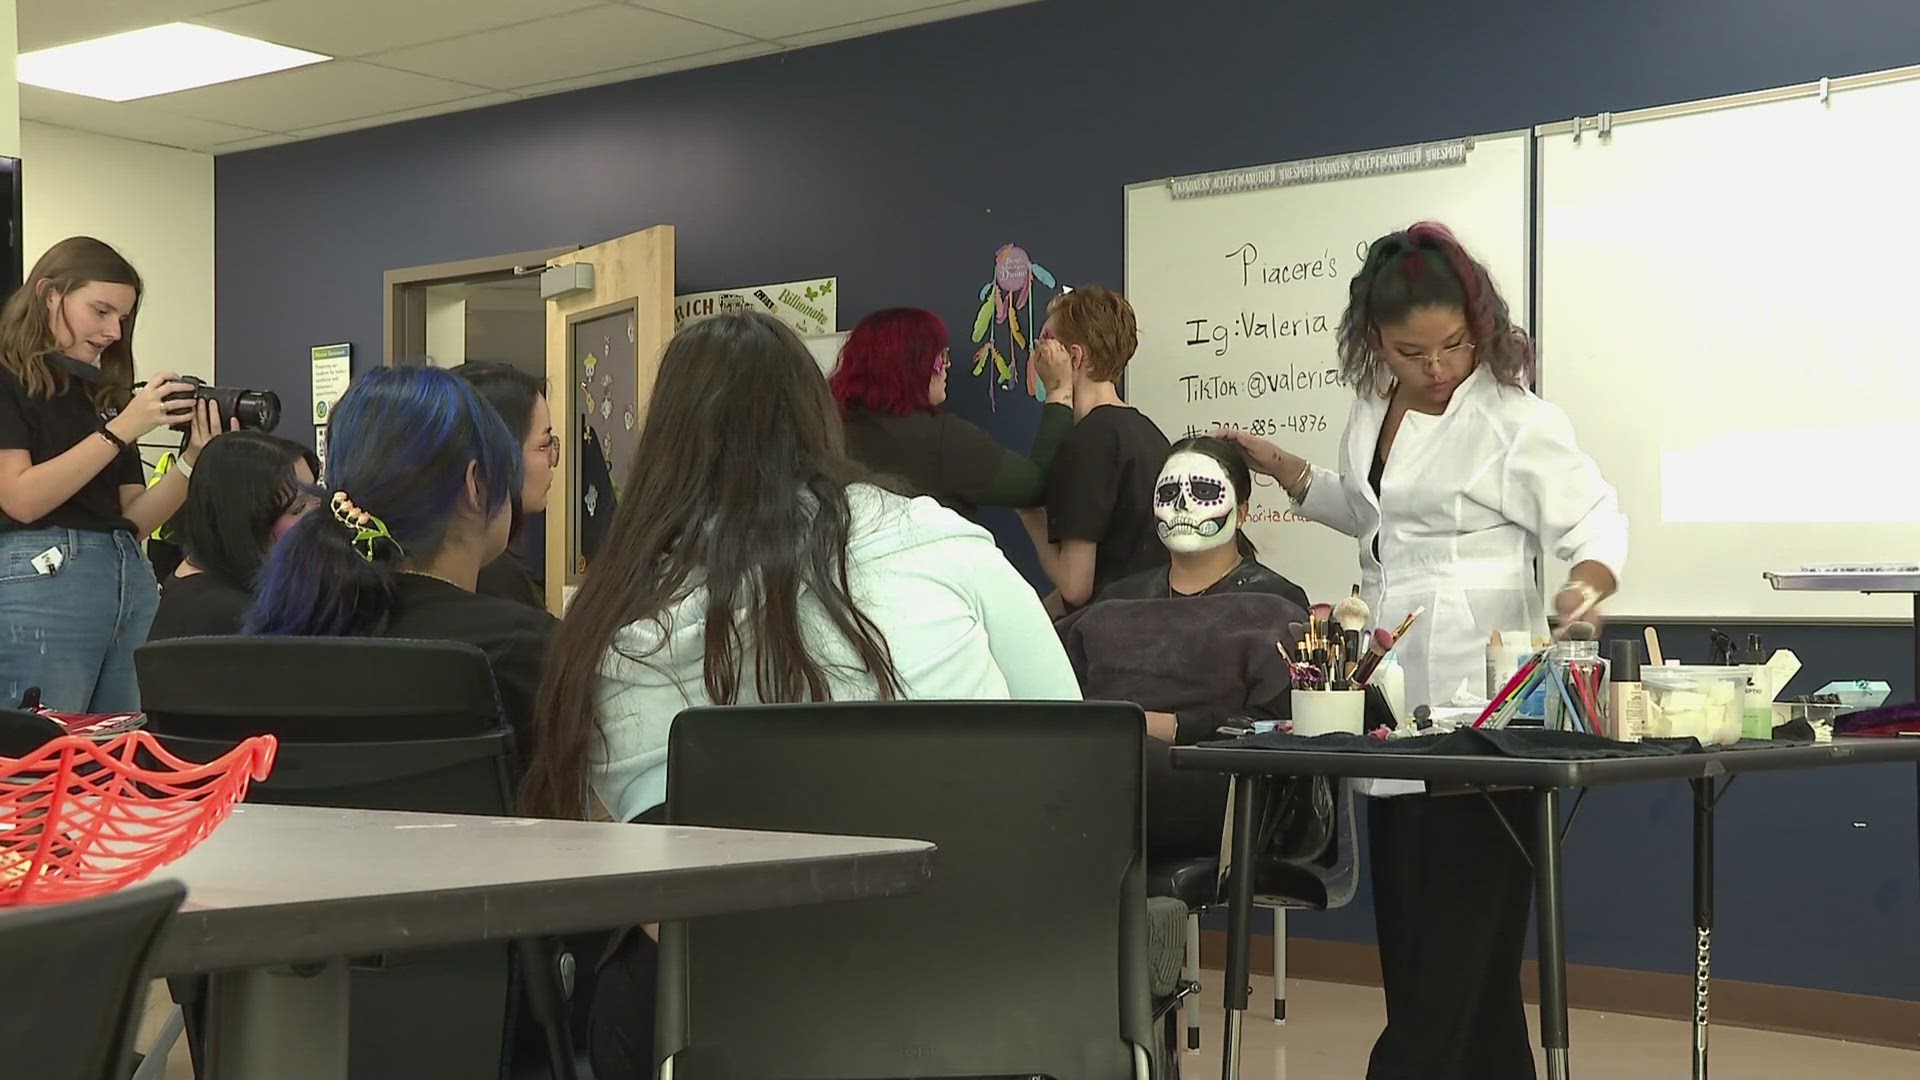 It was a busy Tuesday for cosmetology students at Emily Griffith Technical College as they prepared for Denver's first ever Día de Muertos parade and festival.